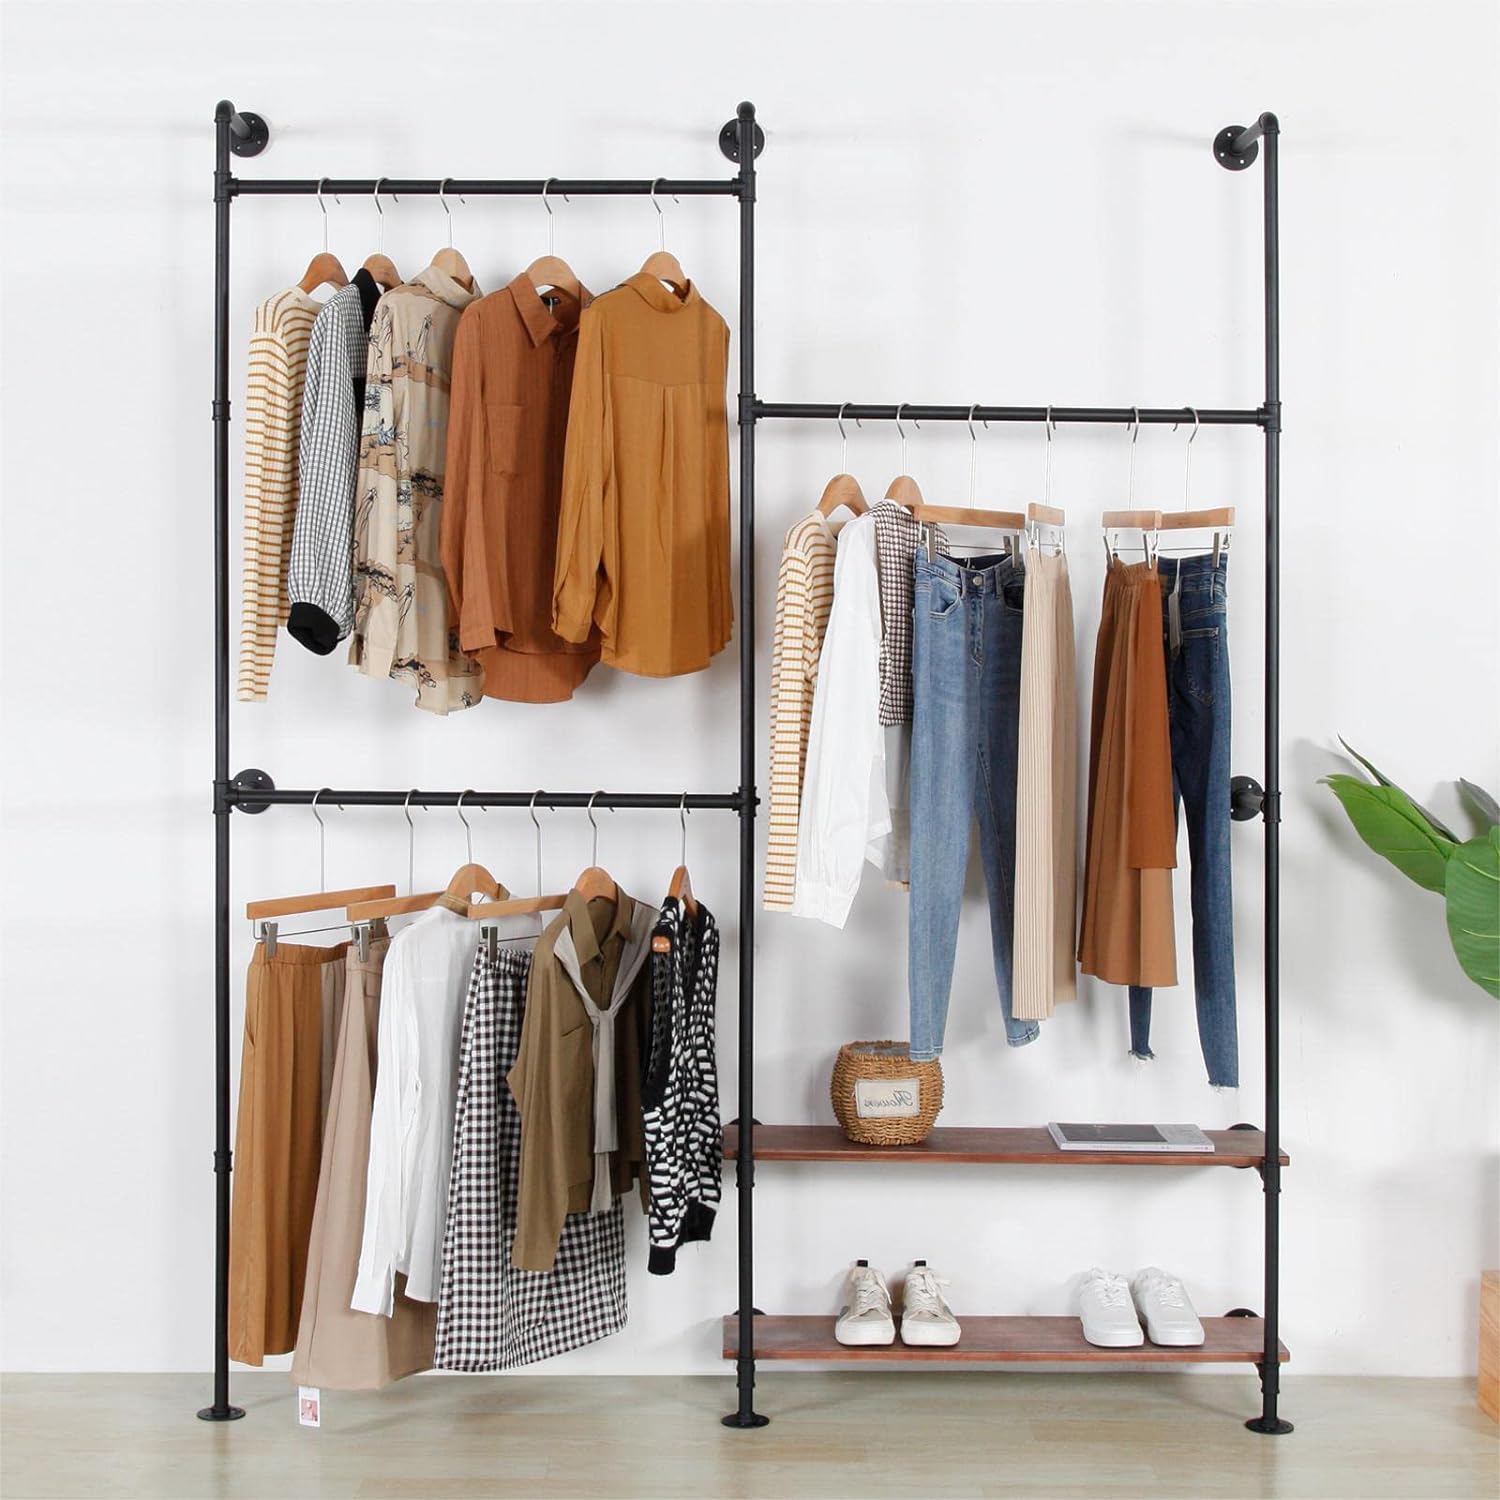 Wall Mounted Industrial Pipe Clothing Rack Wood Garment Rack Hanging Clothes Rack Multi-purpose Heavy Duty Hanging Rod, Steampunk Clothes Rack Retail